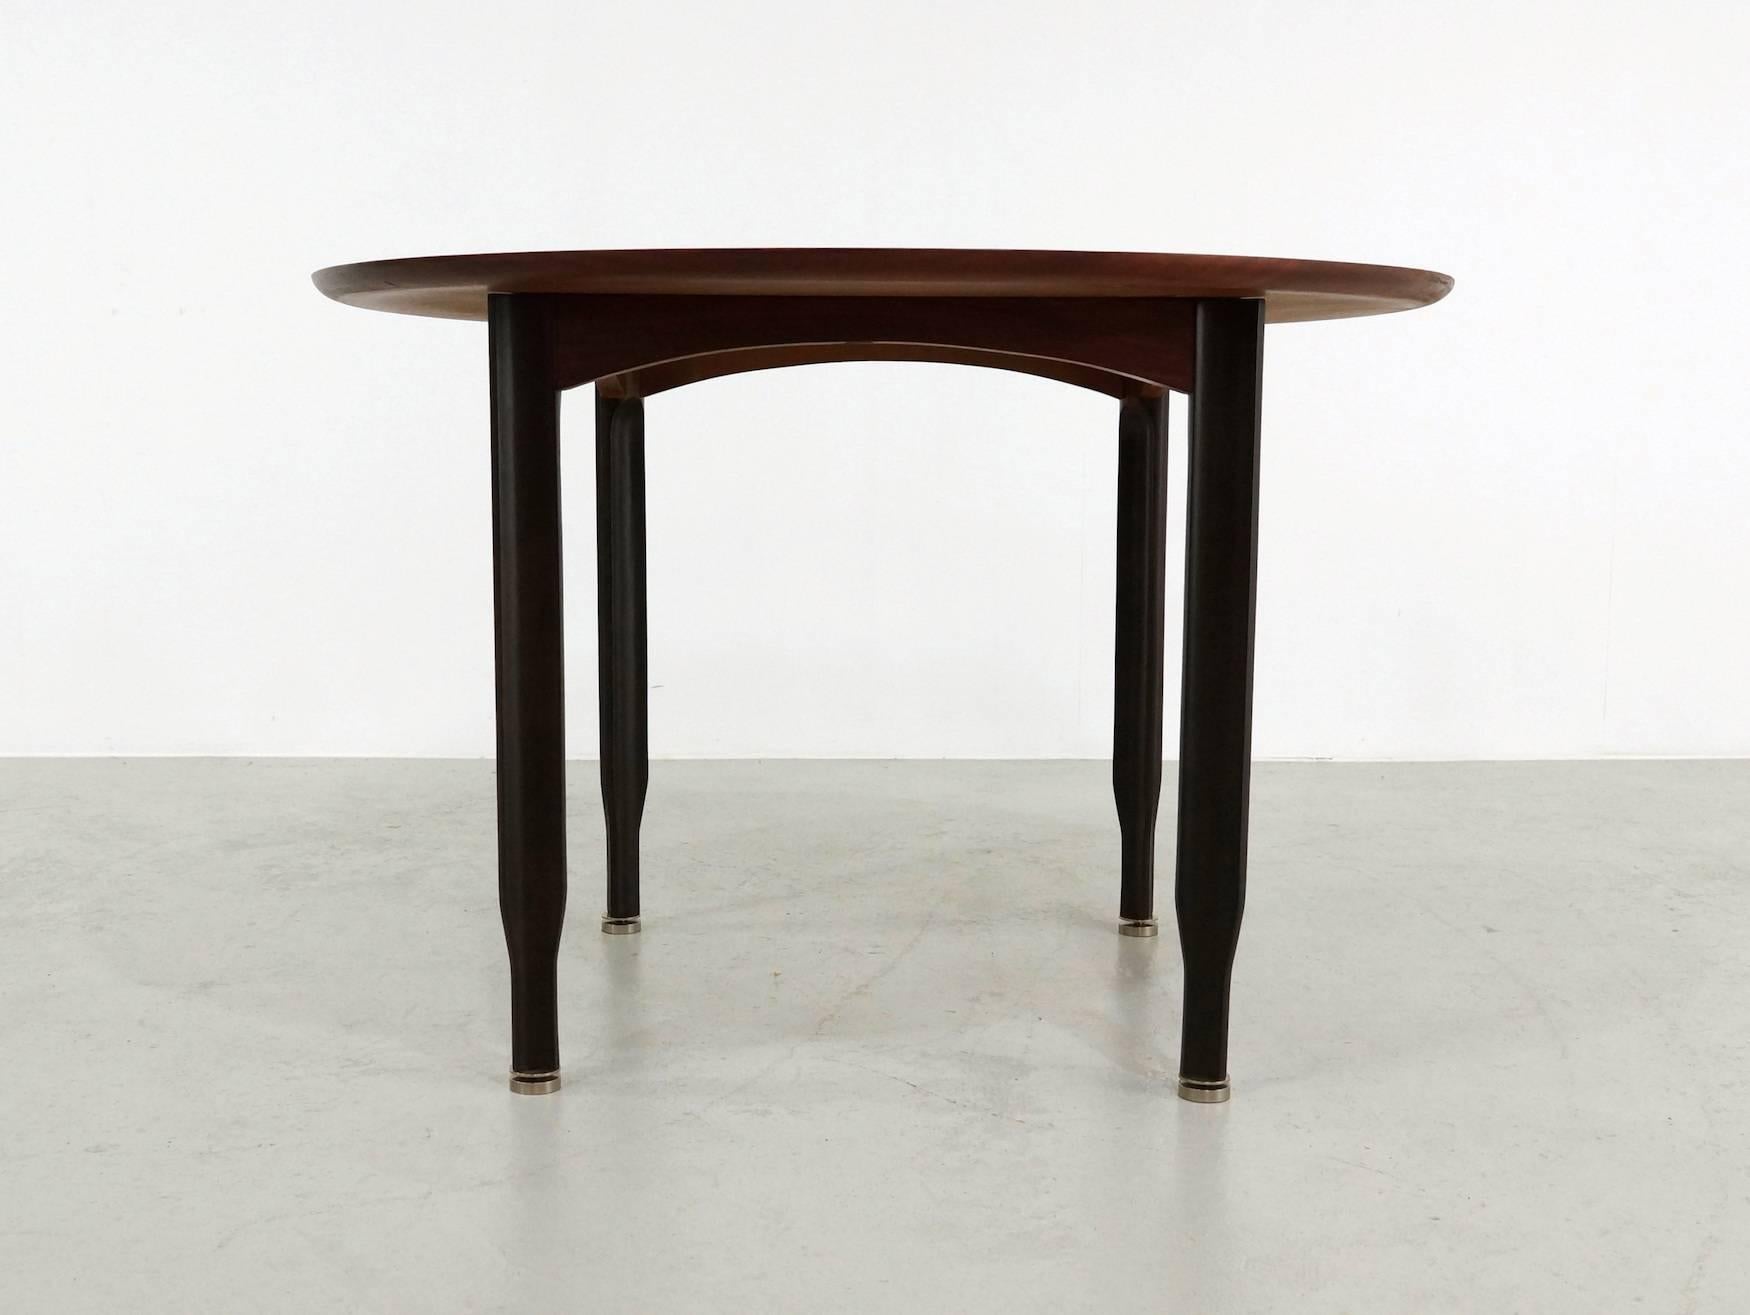 Beautiful Mahogany table with a diameter of 120 cm, on massive beautiful shaped rosewood legs with on the end of each leg an nickel adjustable cap.
Measure: The height is 79 cm so also as desk very good usable.
The table has been professional